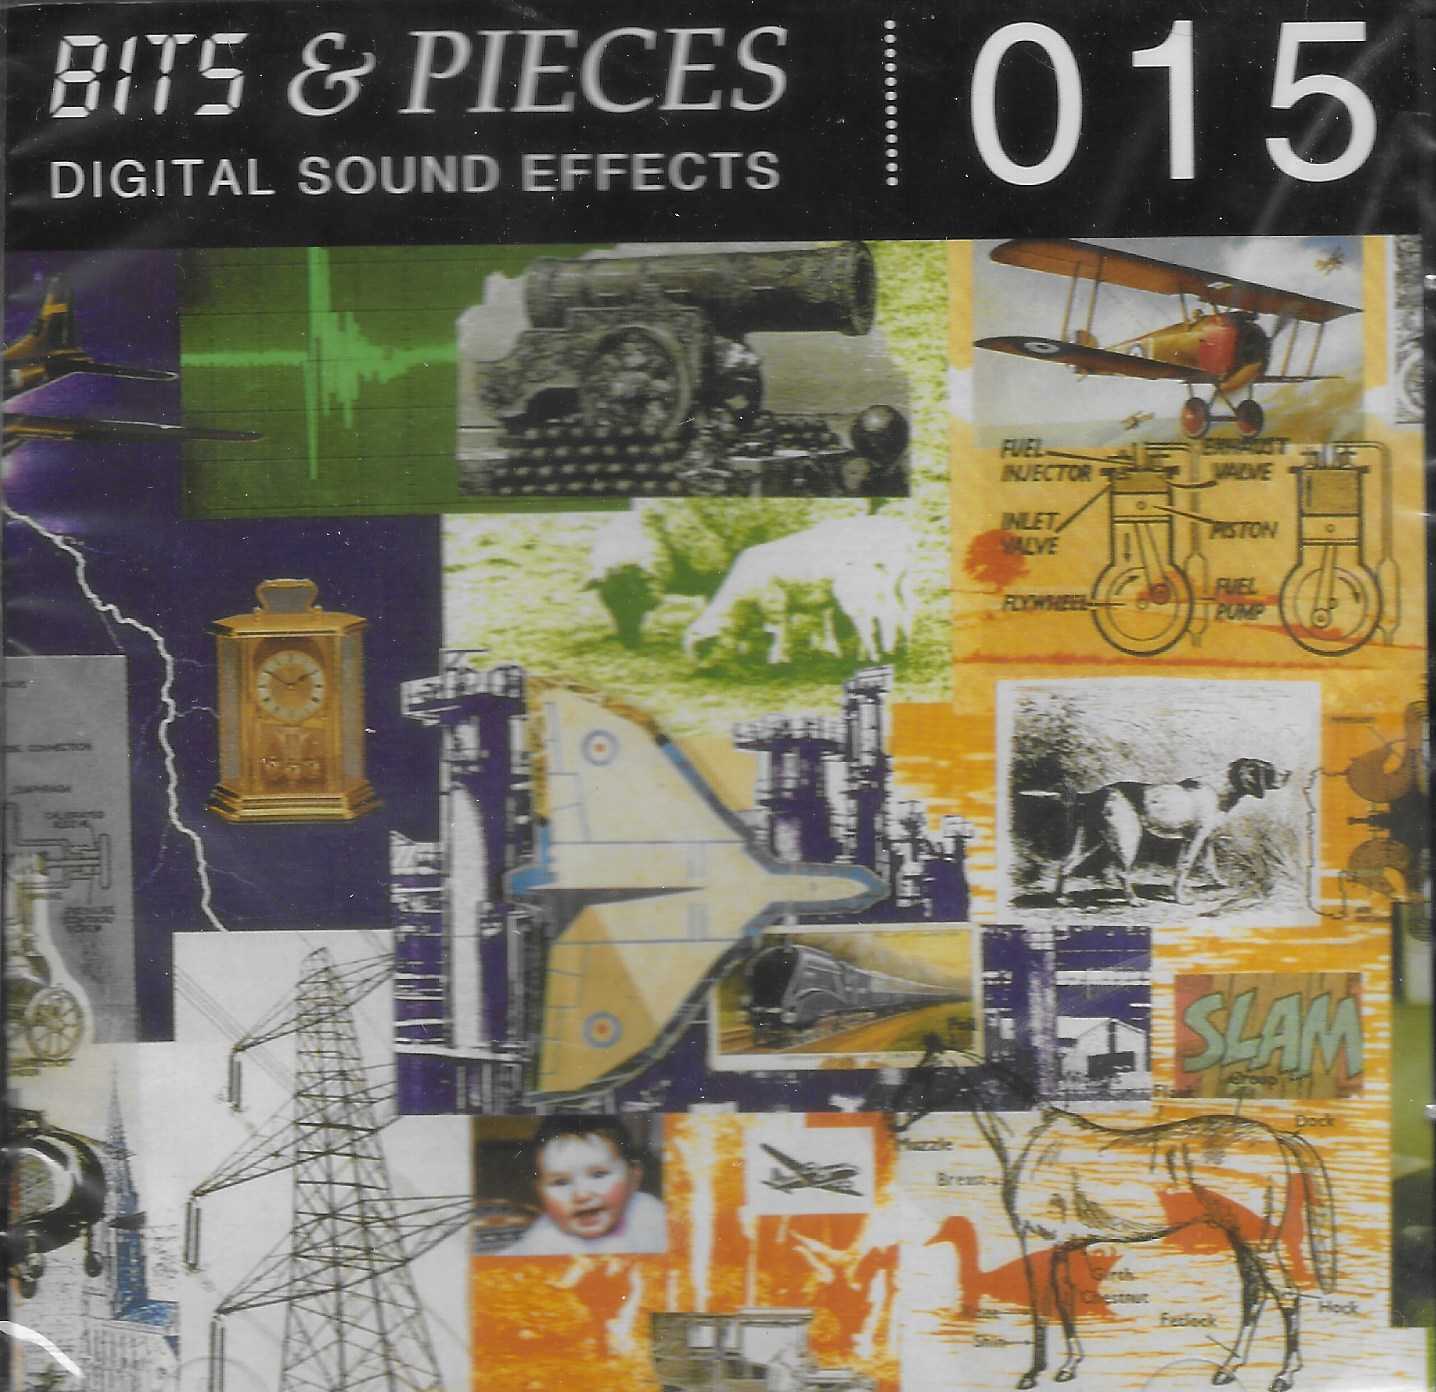 Picture of Bits & pieces digital sound effects 015 by artist Various from ITV, Channel 4 and Channel 5 cds library